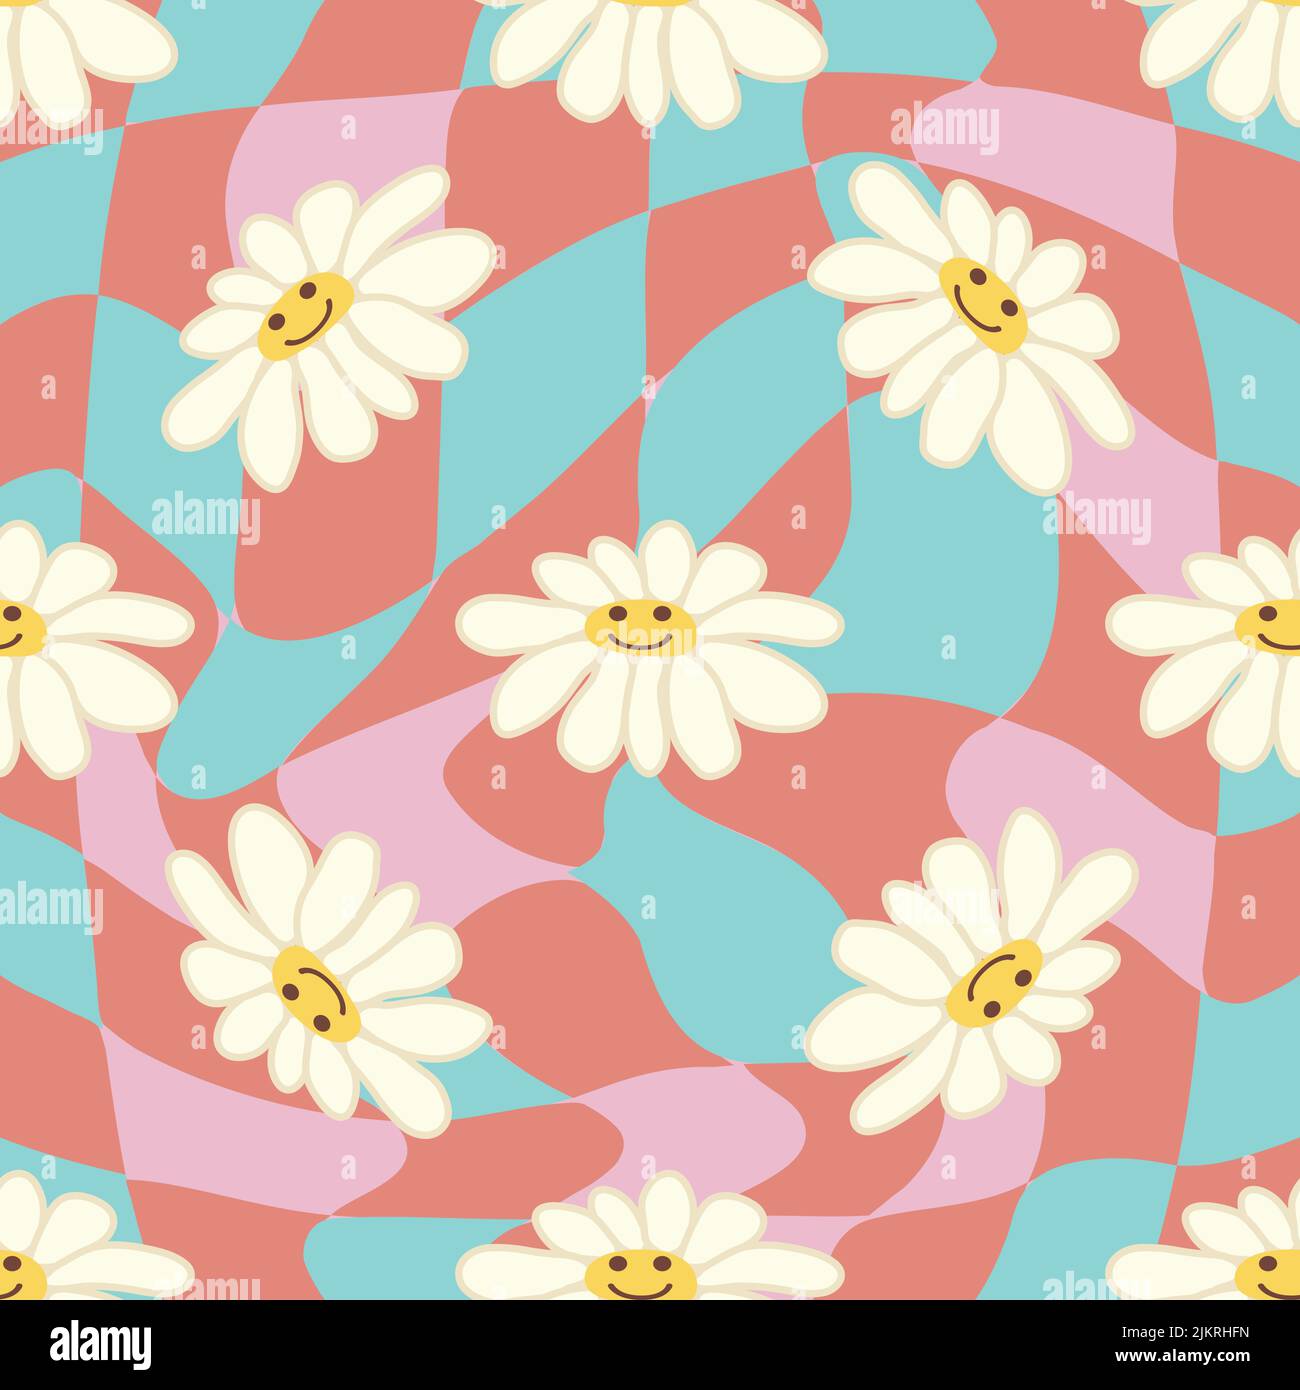 Daisy Print Fabric Wallpaper and Home Decor  Spoonflower